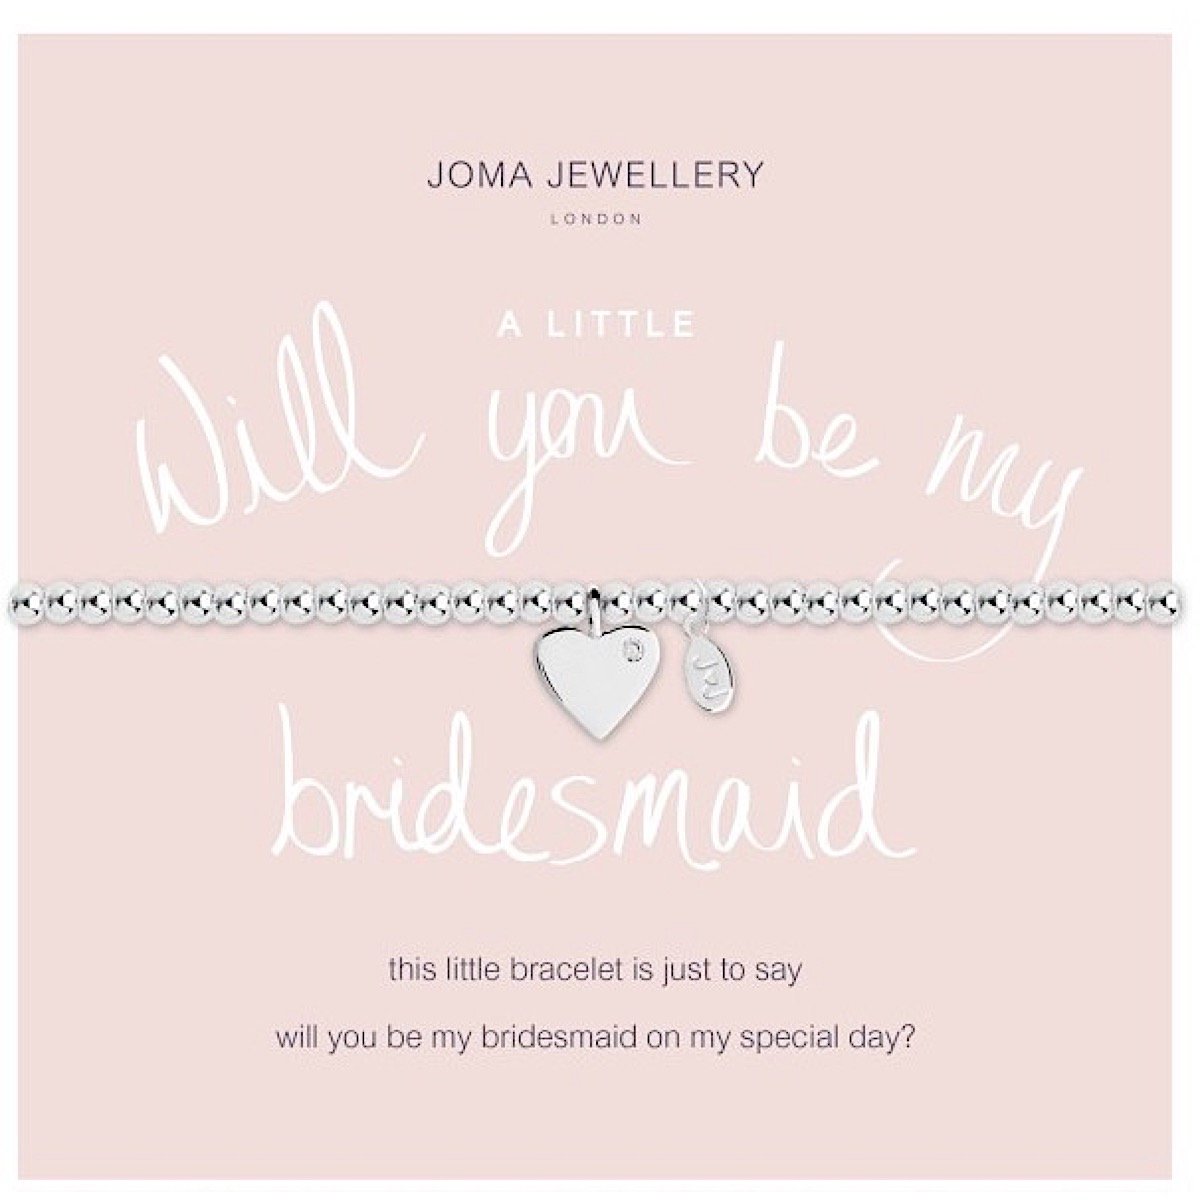 Your biggest bridesmaid gift questions answered.